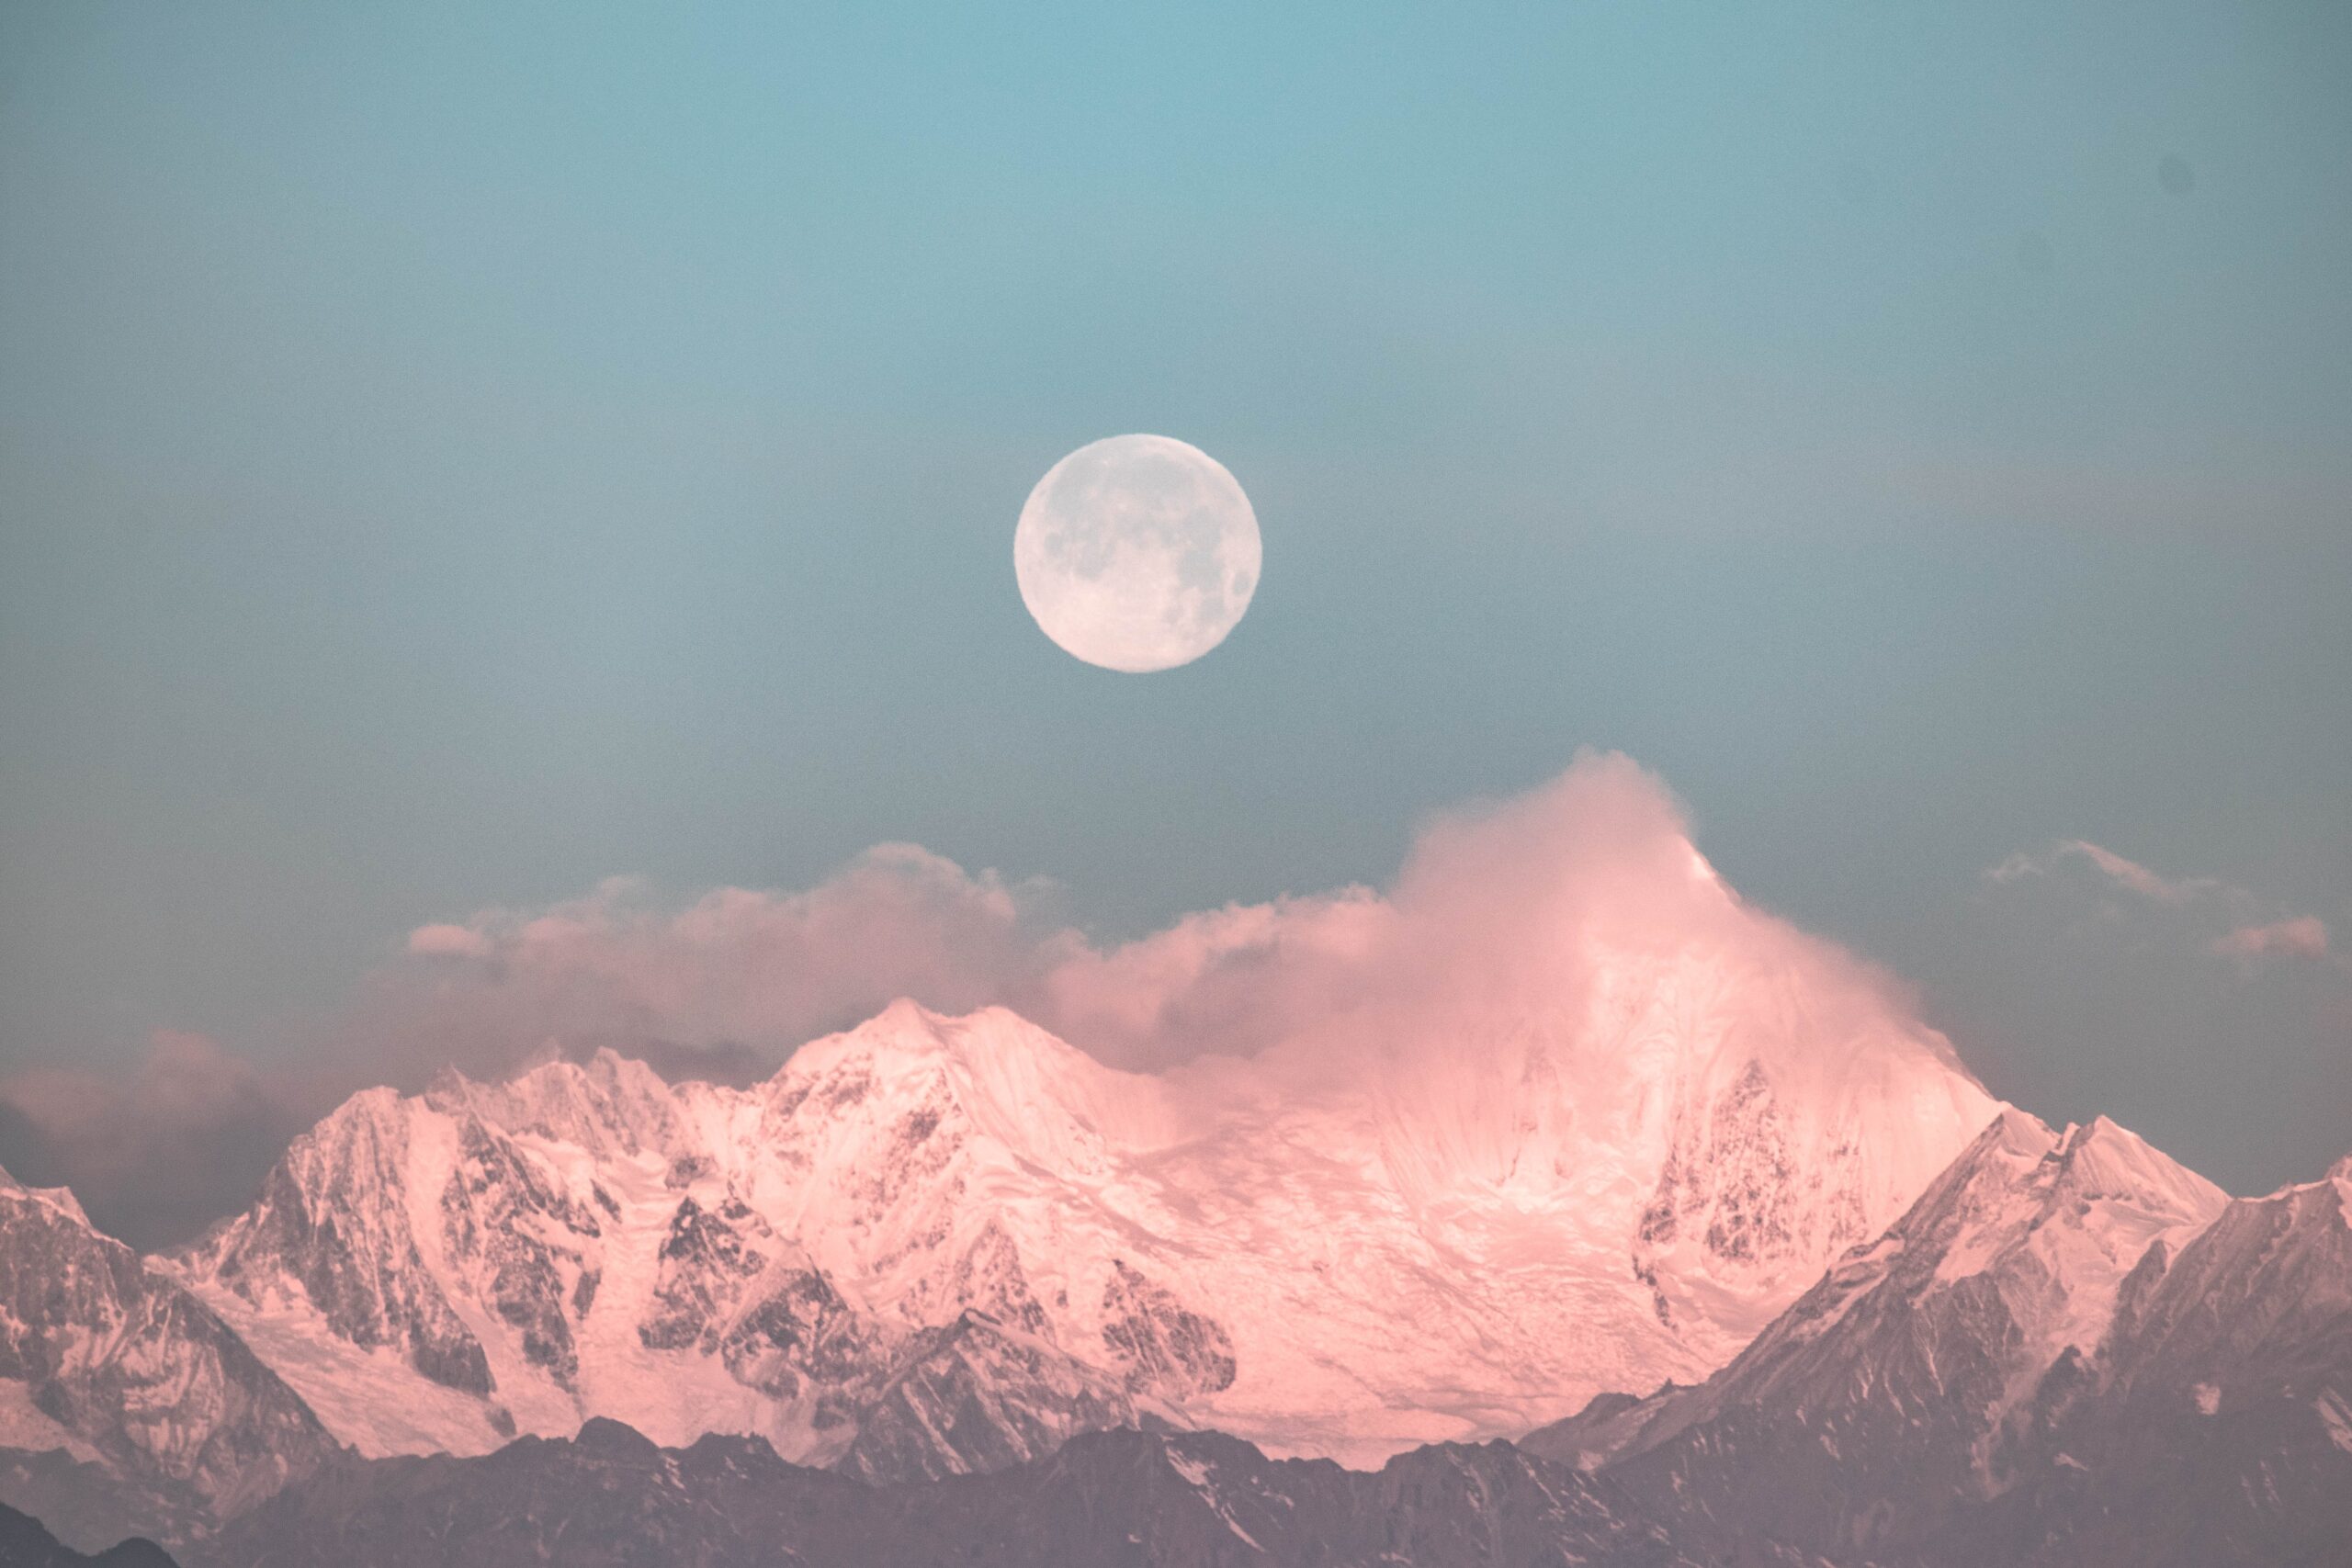 Moon over snow-capped mountain